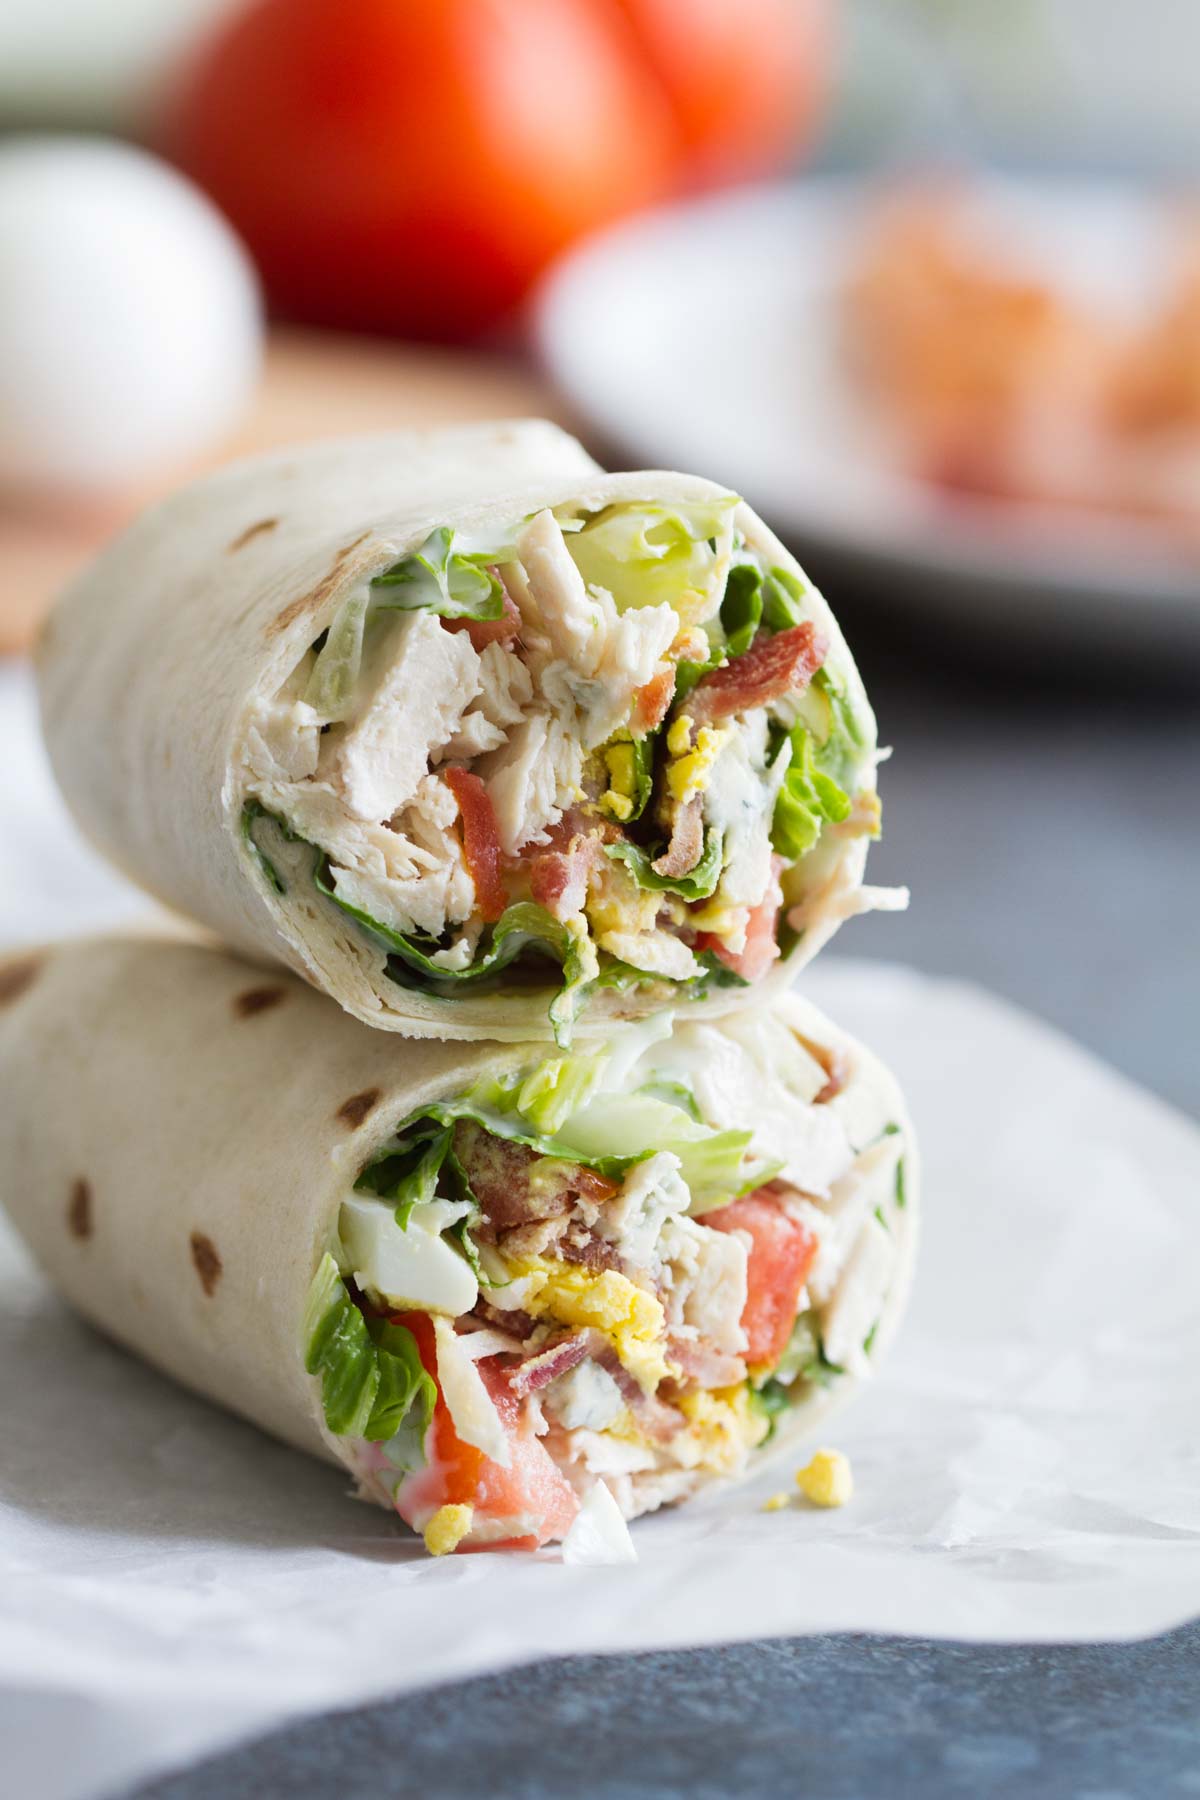 Close-up, two halves of a wrap filled with lettuce, chicken, bacon, tomato, and hardboiled egg